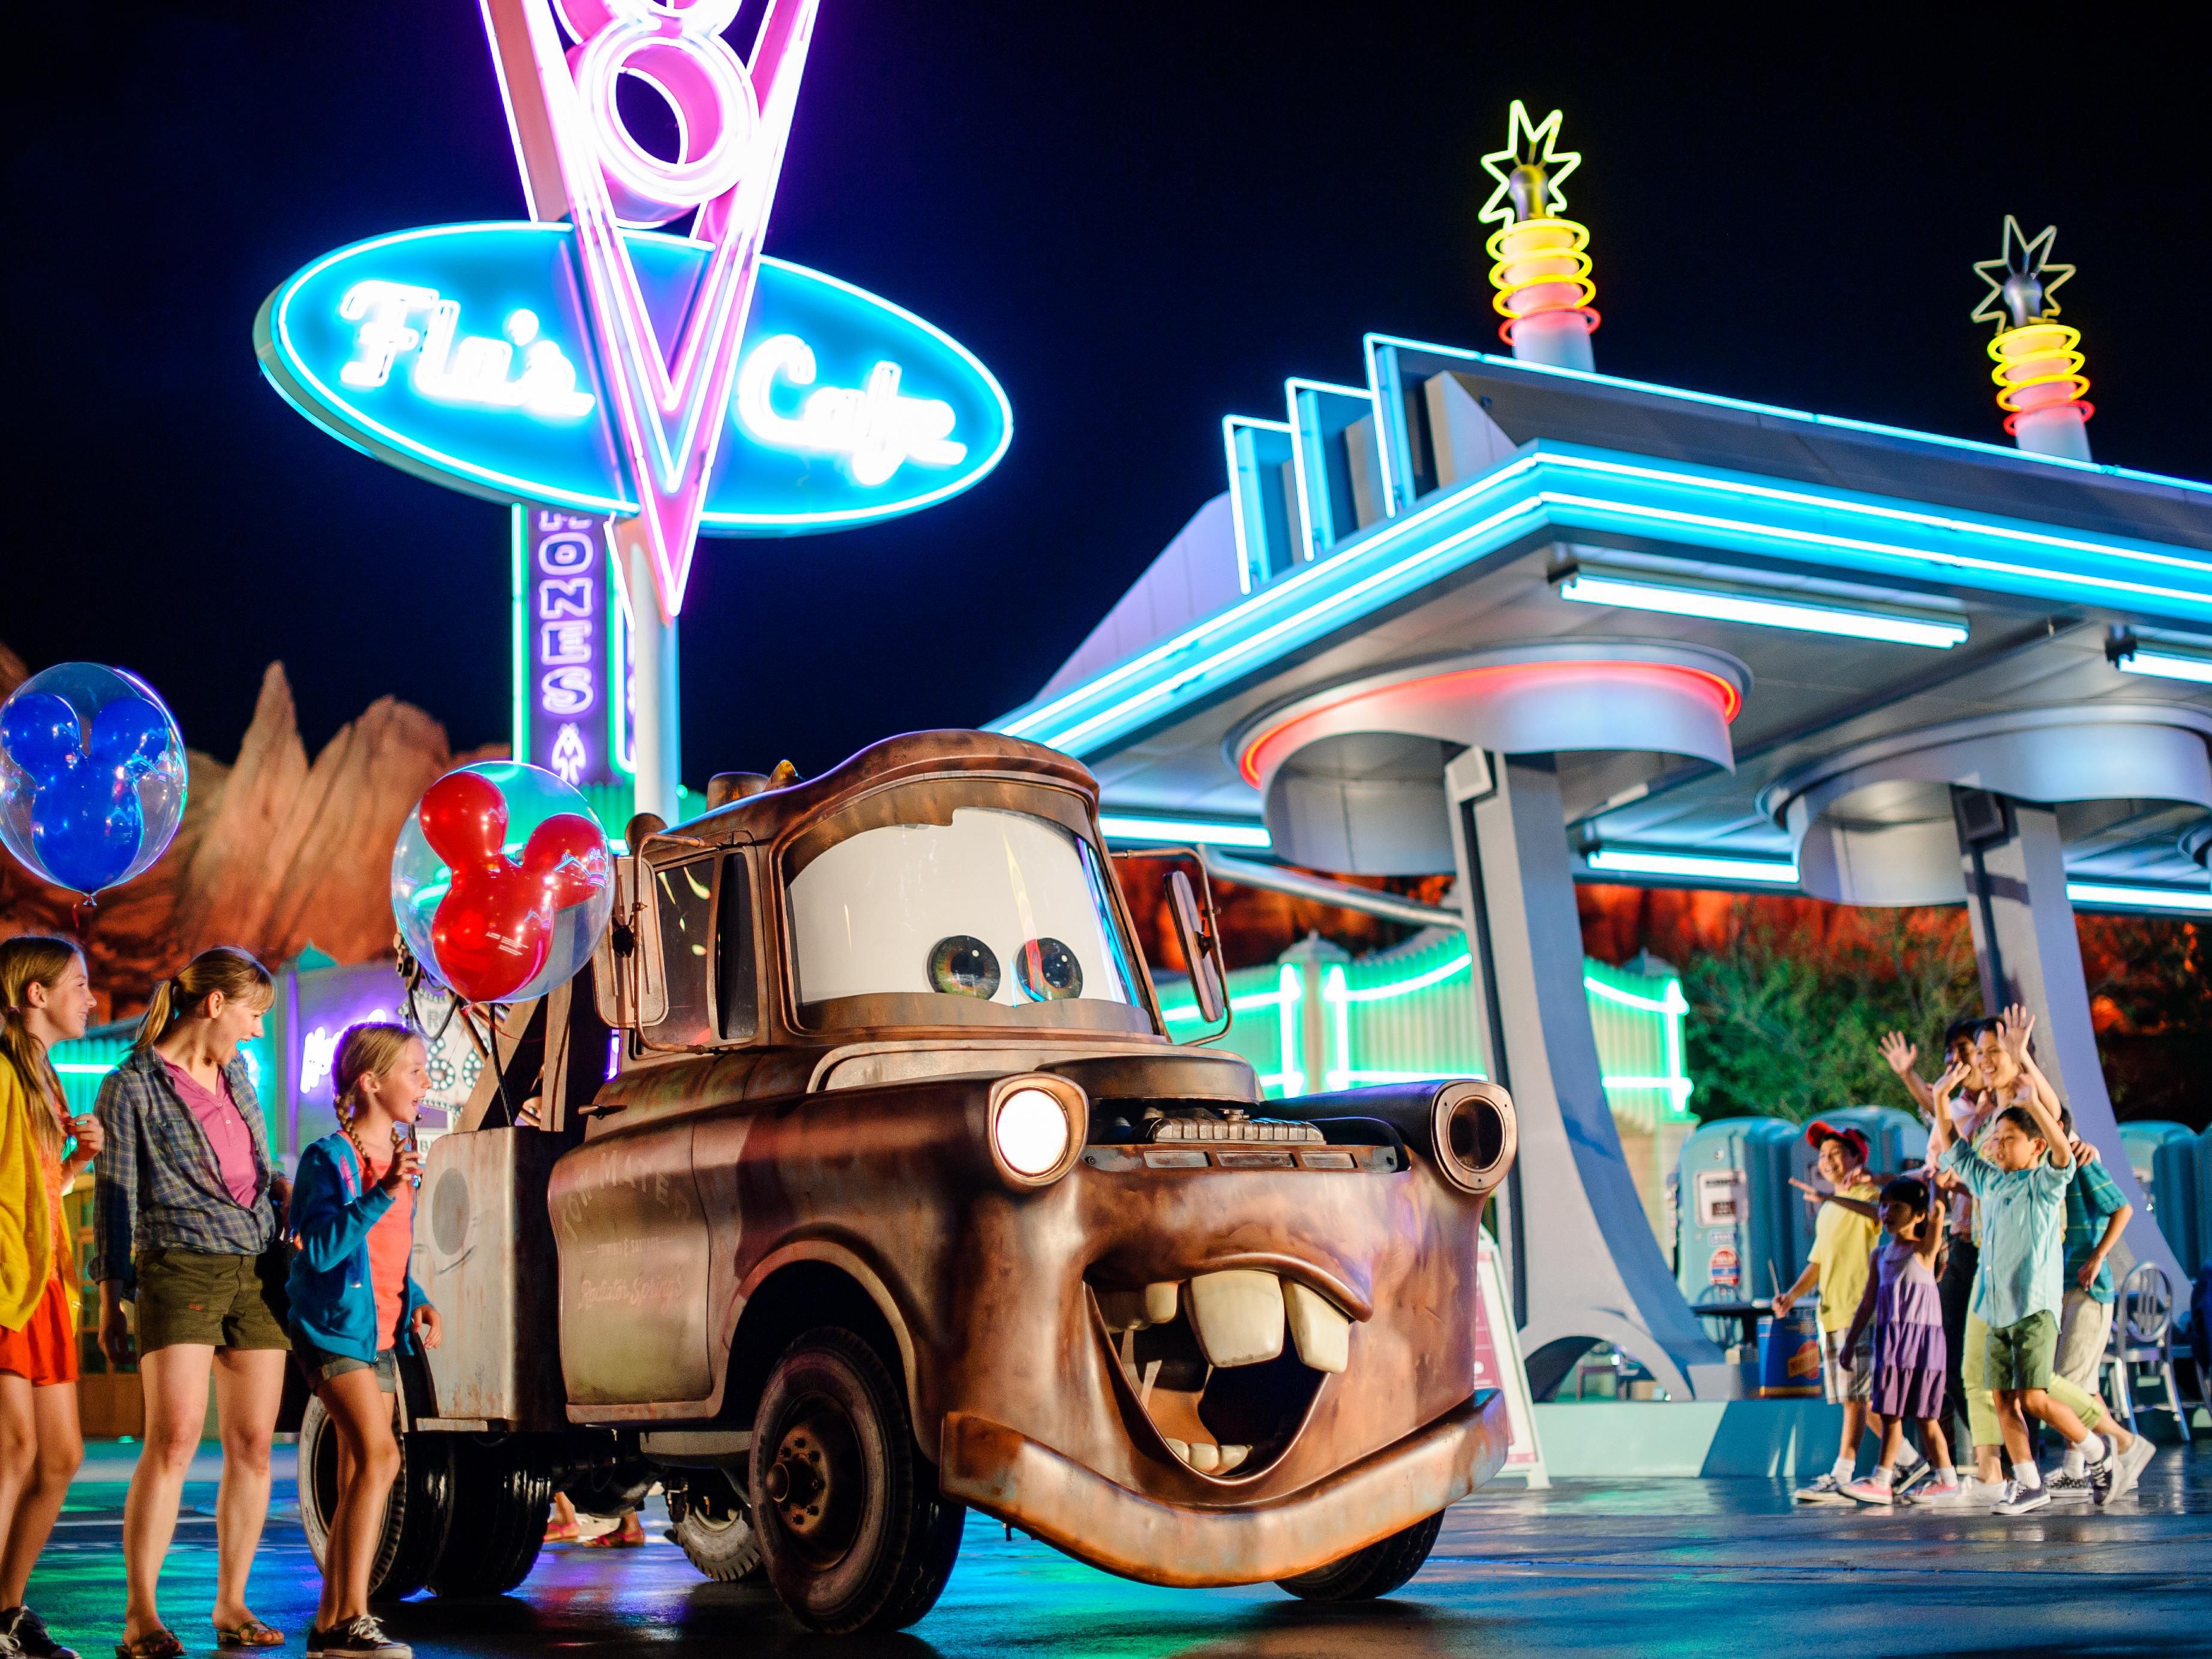 Take advantage of our location near Disneyland® Resort and Disney® California Adventure Park. Purchase theme park tickets through our partner site and learn more about about Disney® Parks.